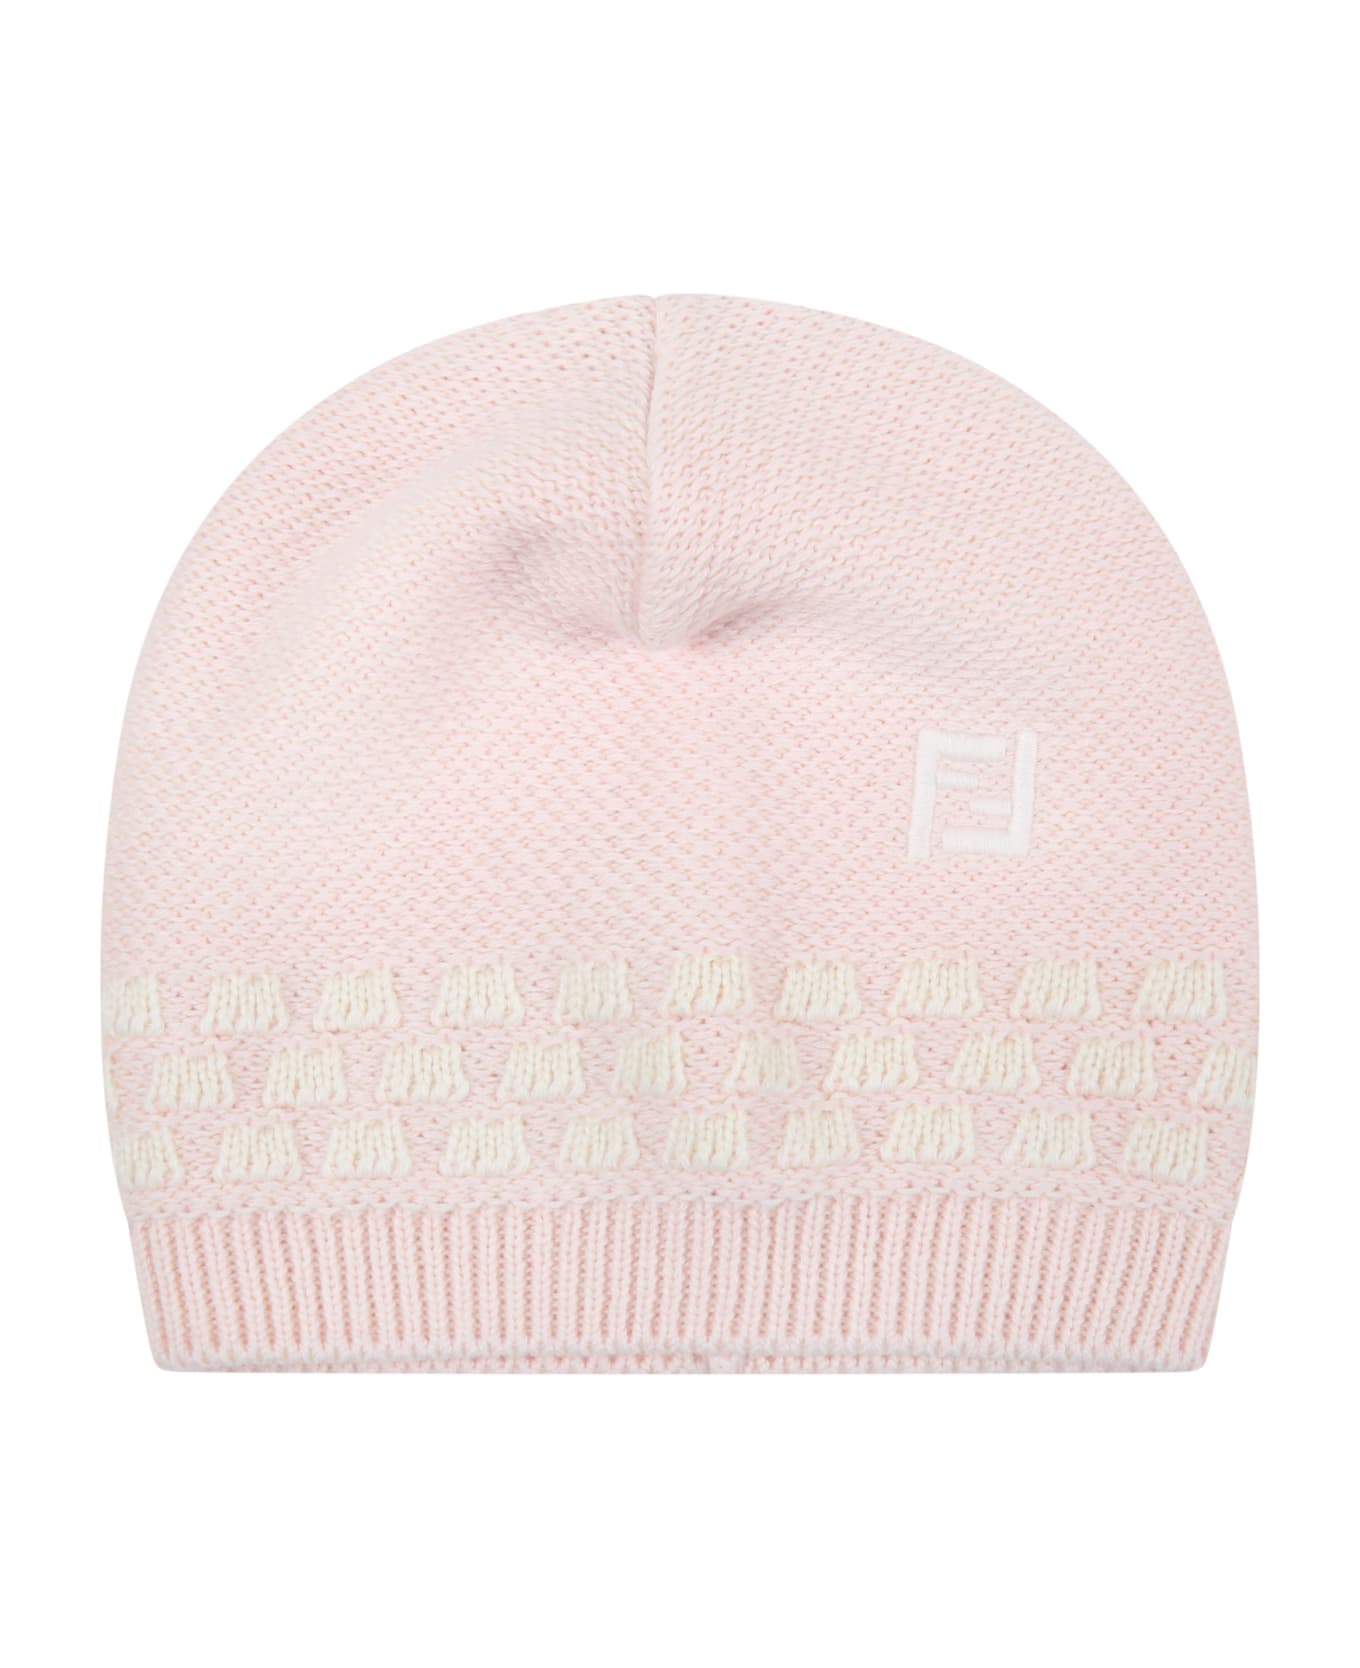 Fendi Pink Set For Baby Girl With Douple Ff - Pink ボディスーツ＆セットアップ